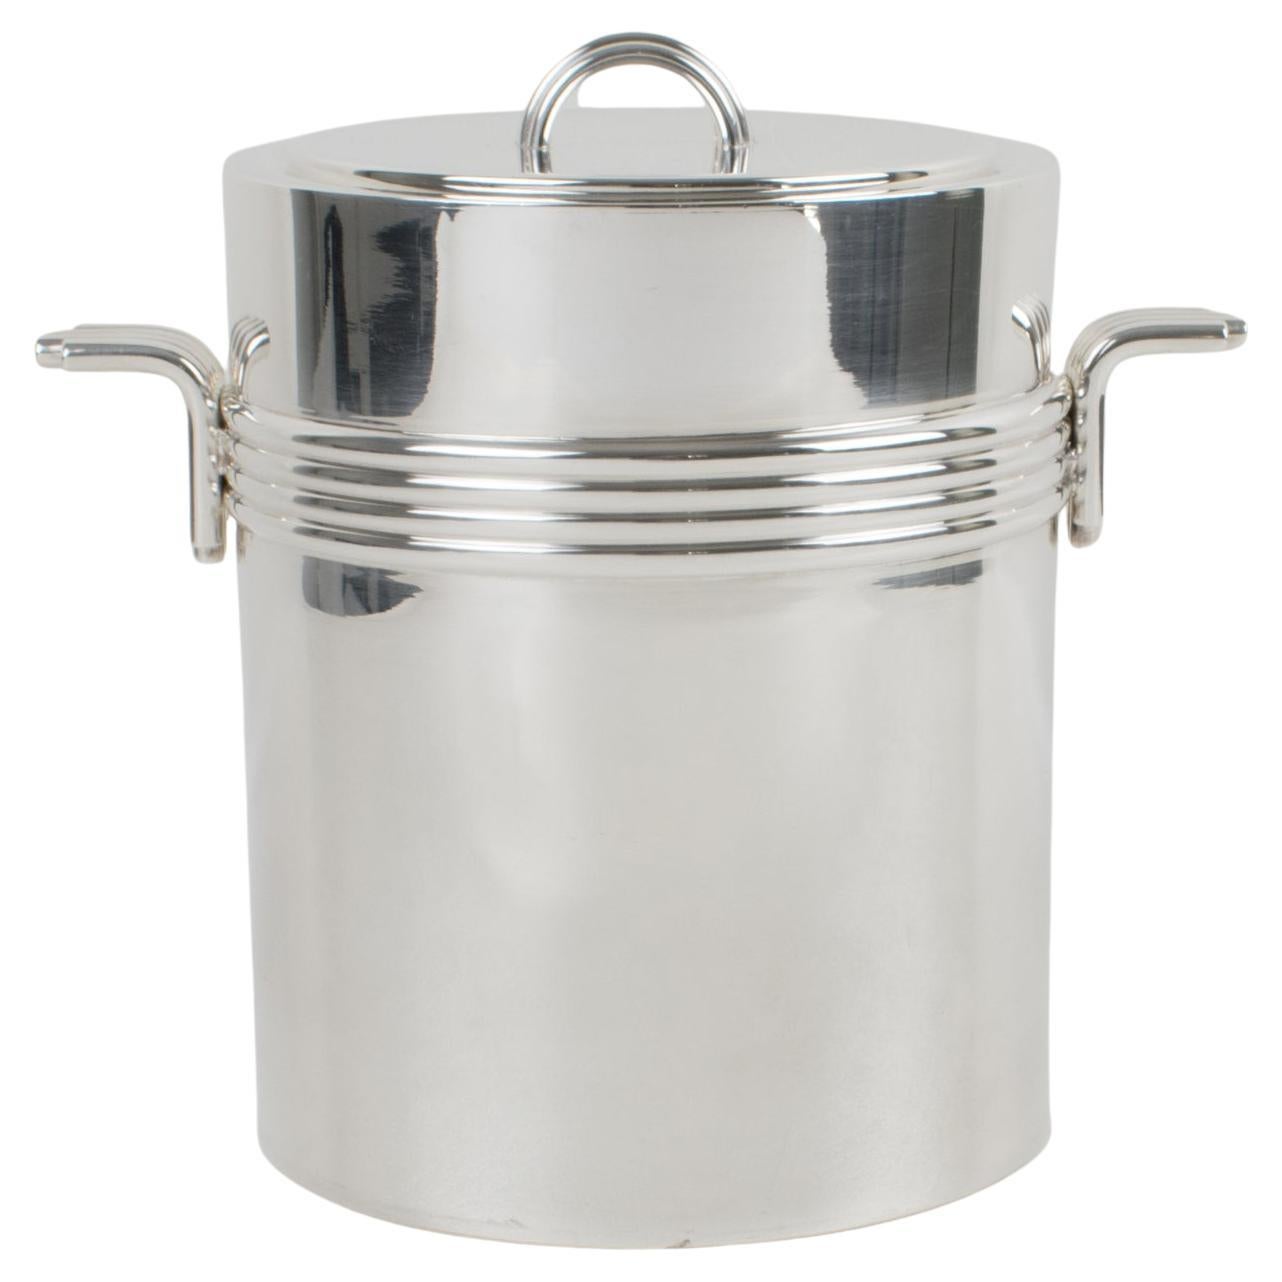 Christian Dior Silver Plate Ice Bucket Cooler